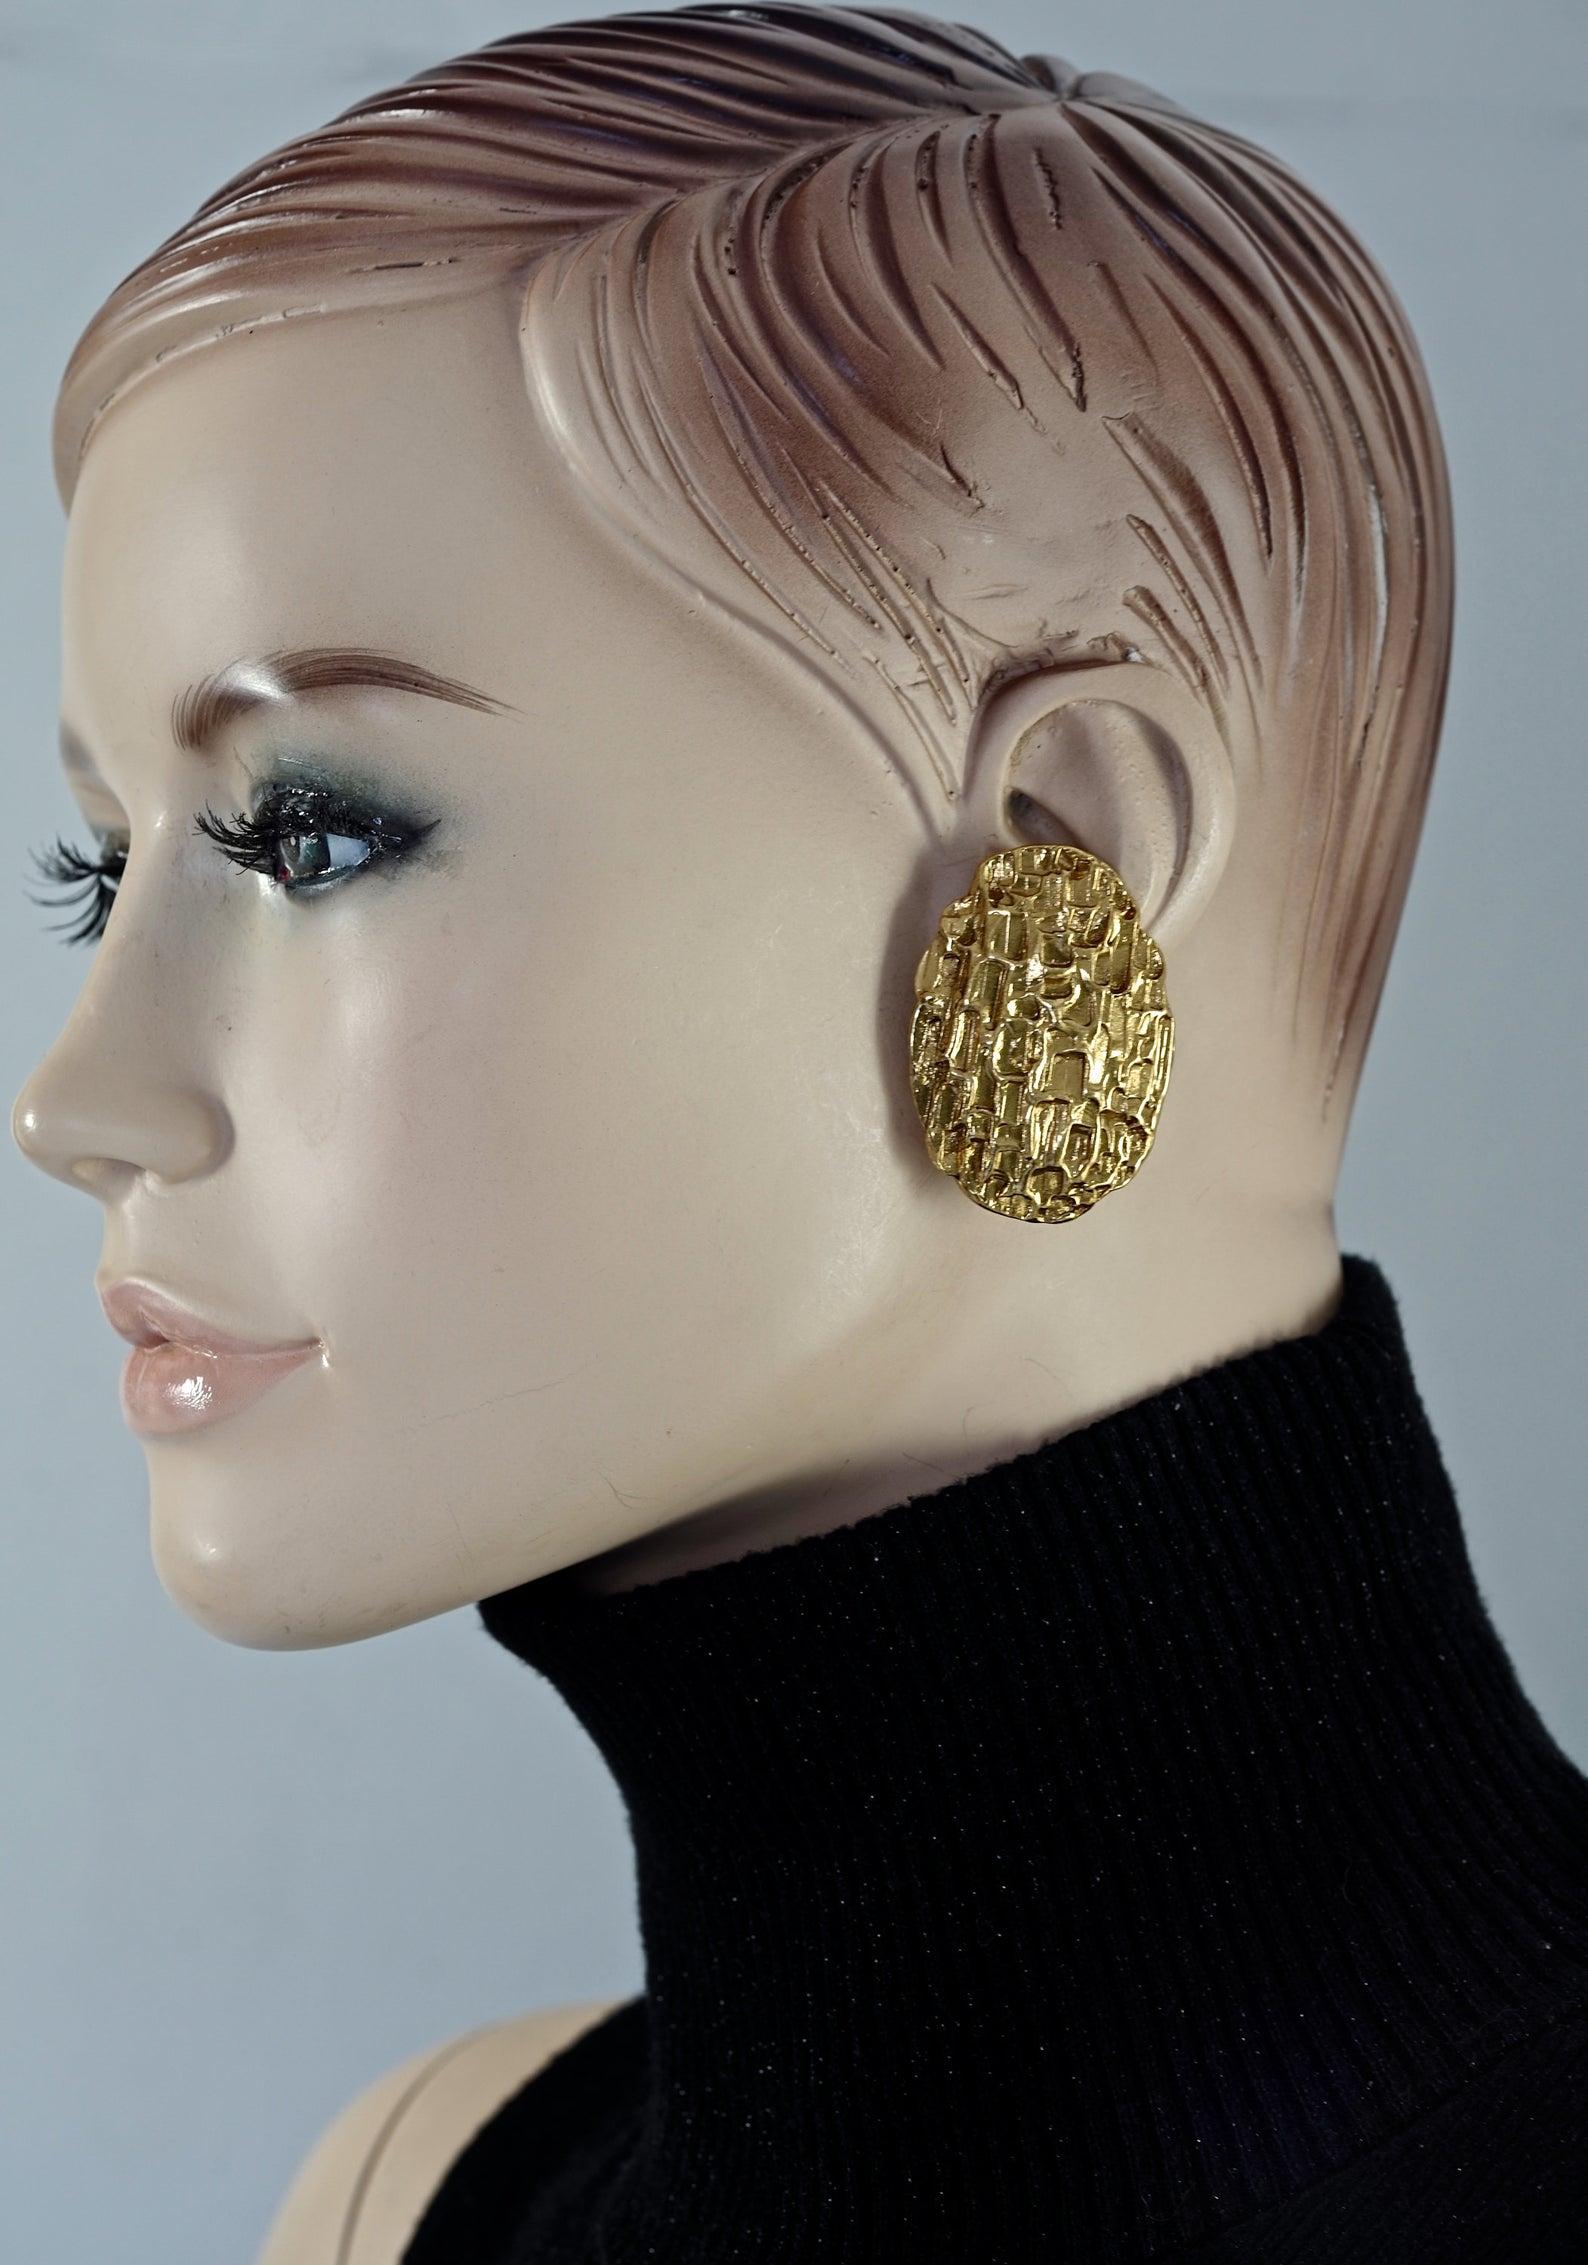 Vintage Massive YVES SAINT LAURENT Ysl by Robert Goossens Textured Earrings

Measurements:
Height: 1.77 inches (4.5 cm)
Width: 1.25 inches (3.2 cm)
Weight per Earring: 17 grams

Features:
- 100% Authentic YVES SAINT LAURENT by Robert Goossens.
-